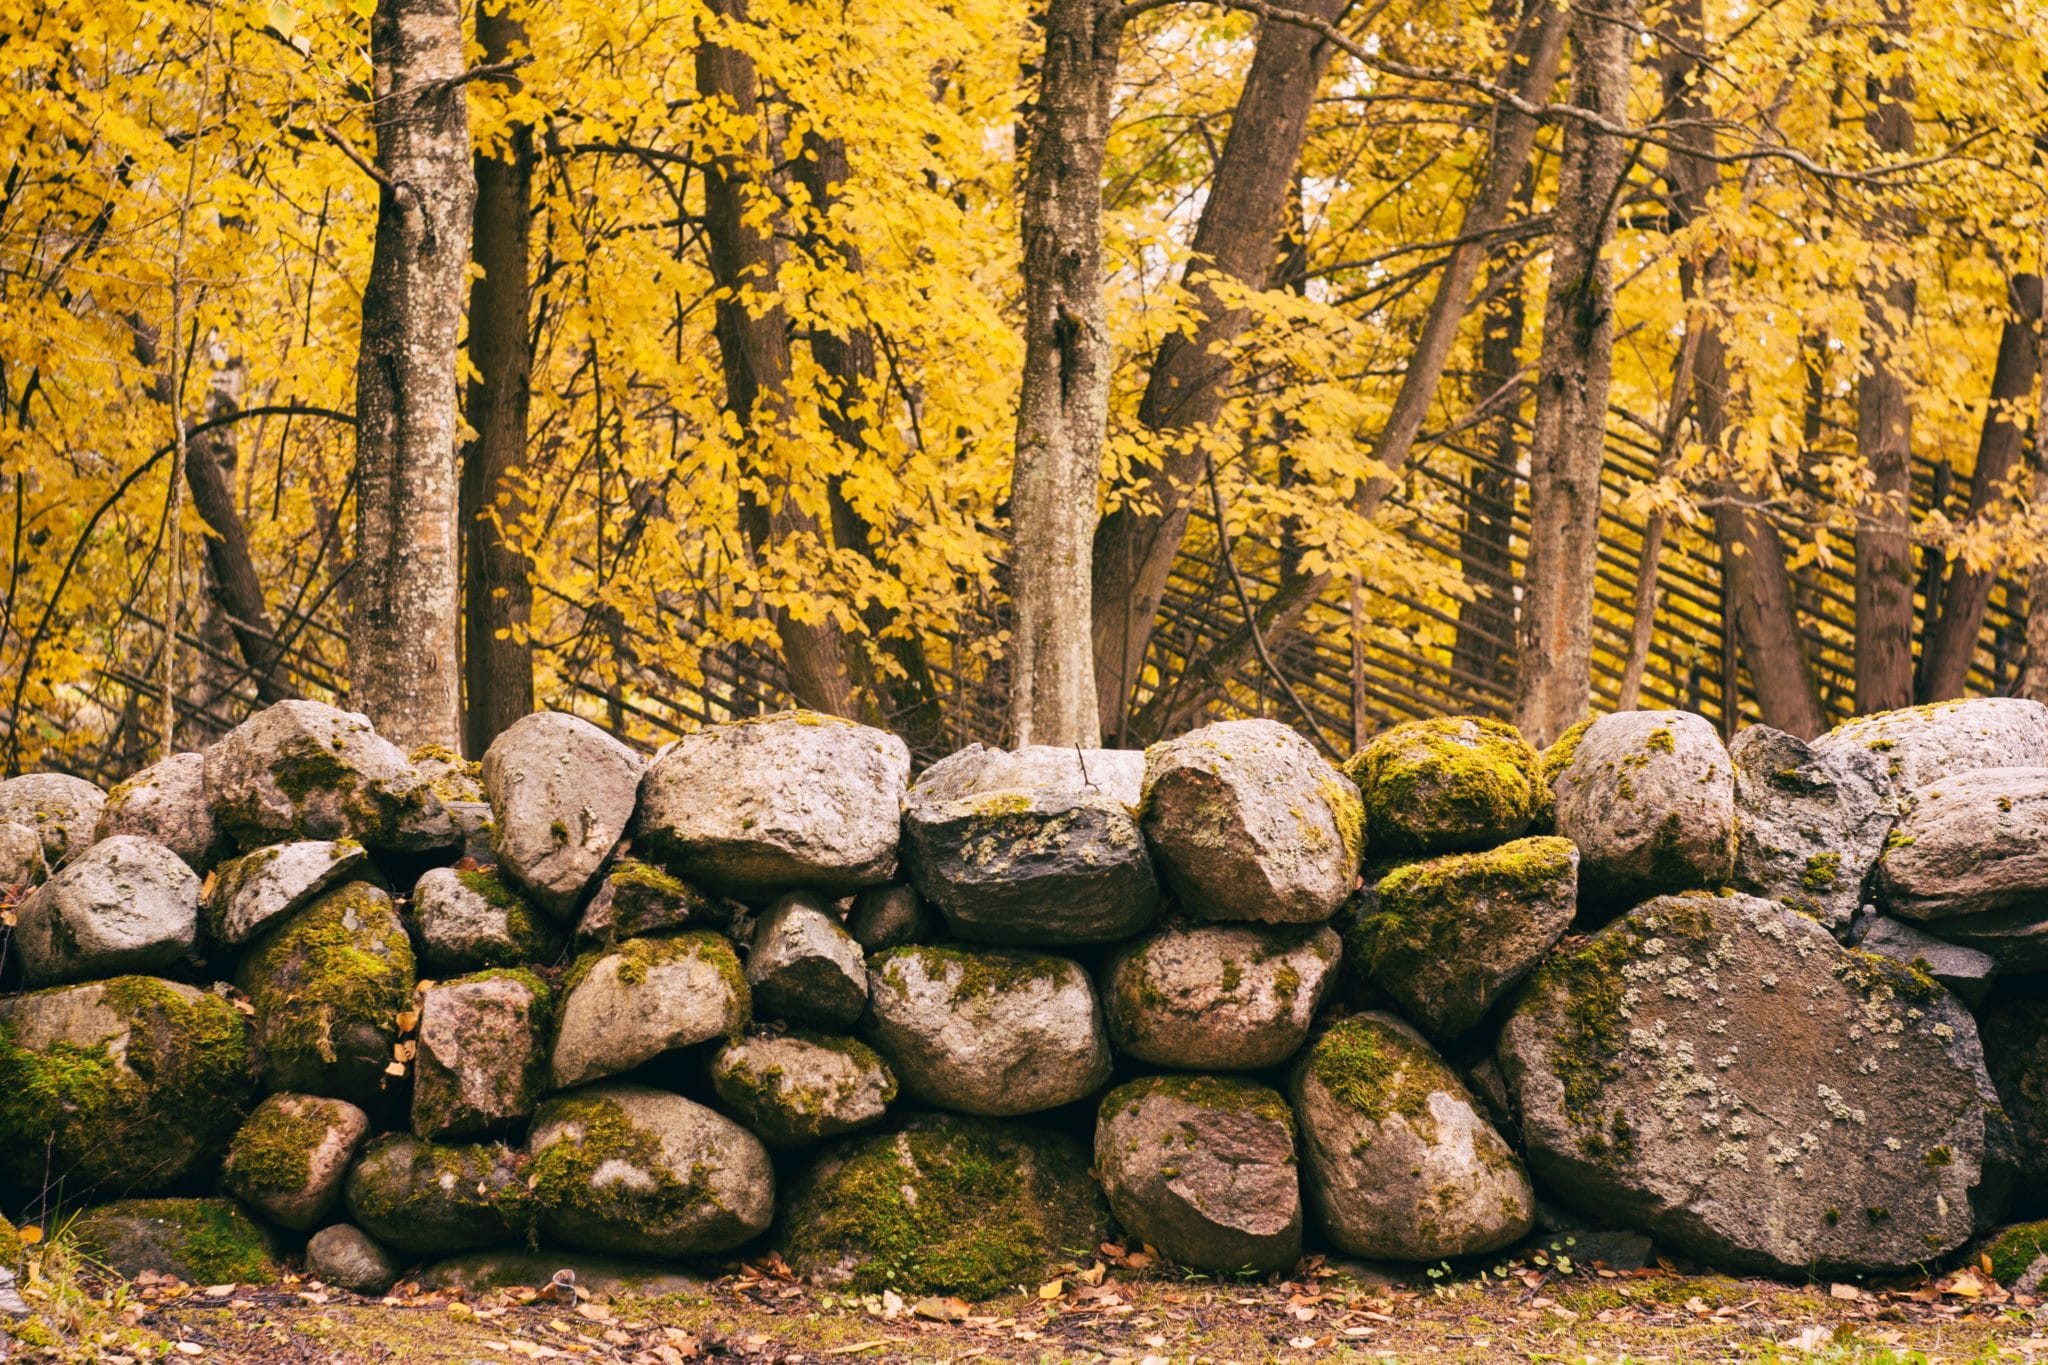 A wall of rocks stacked on top of each other with Autumn trees lining the other side.